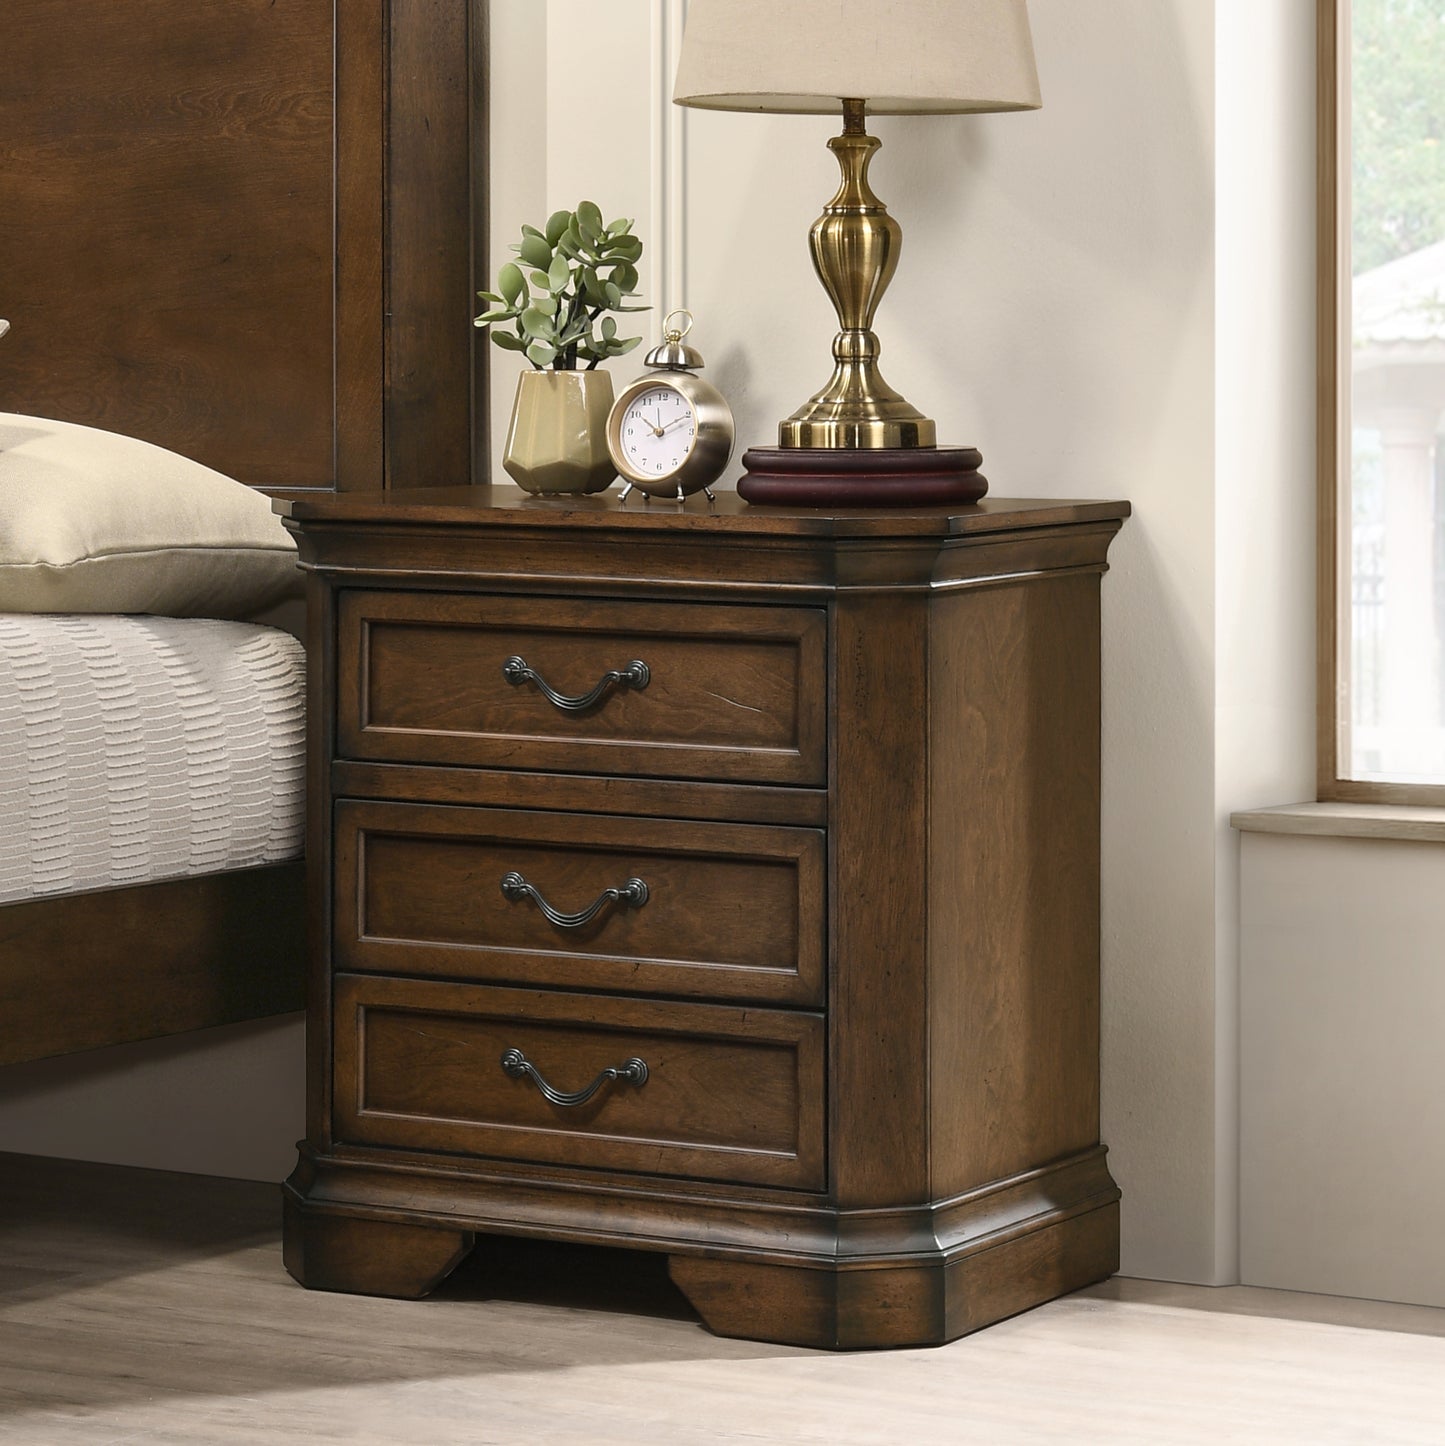 Maderne Traditional Wood 3-Drawer Nightstand, Antique Walnut Finish